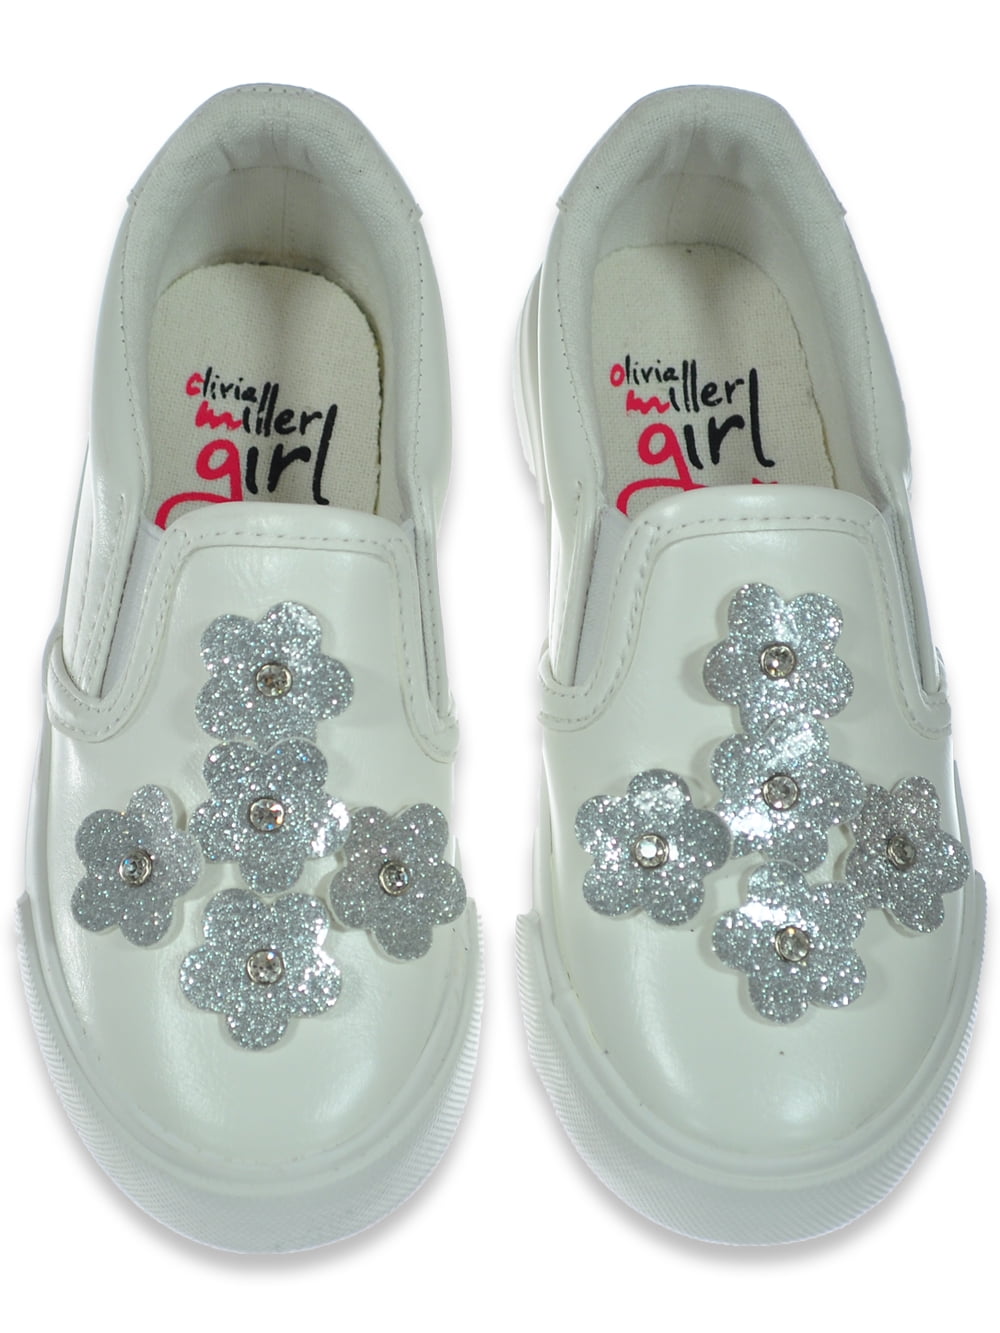 girls NEW SILVER SPARKLE SNEAKERS SHOES size 4 OLIVIA MILLER laces SCHOOL  WEAR